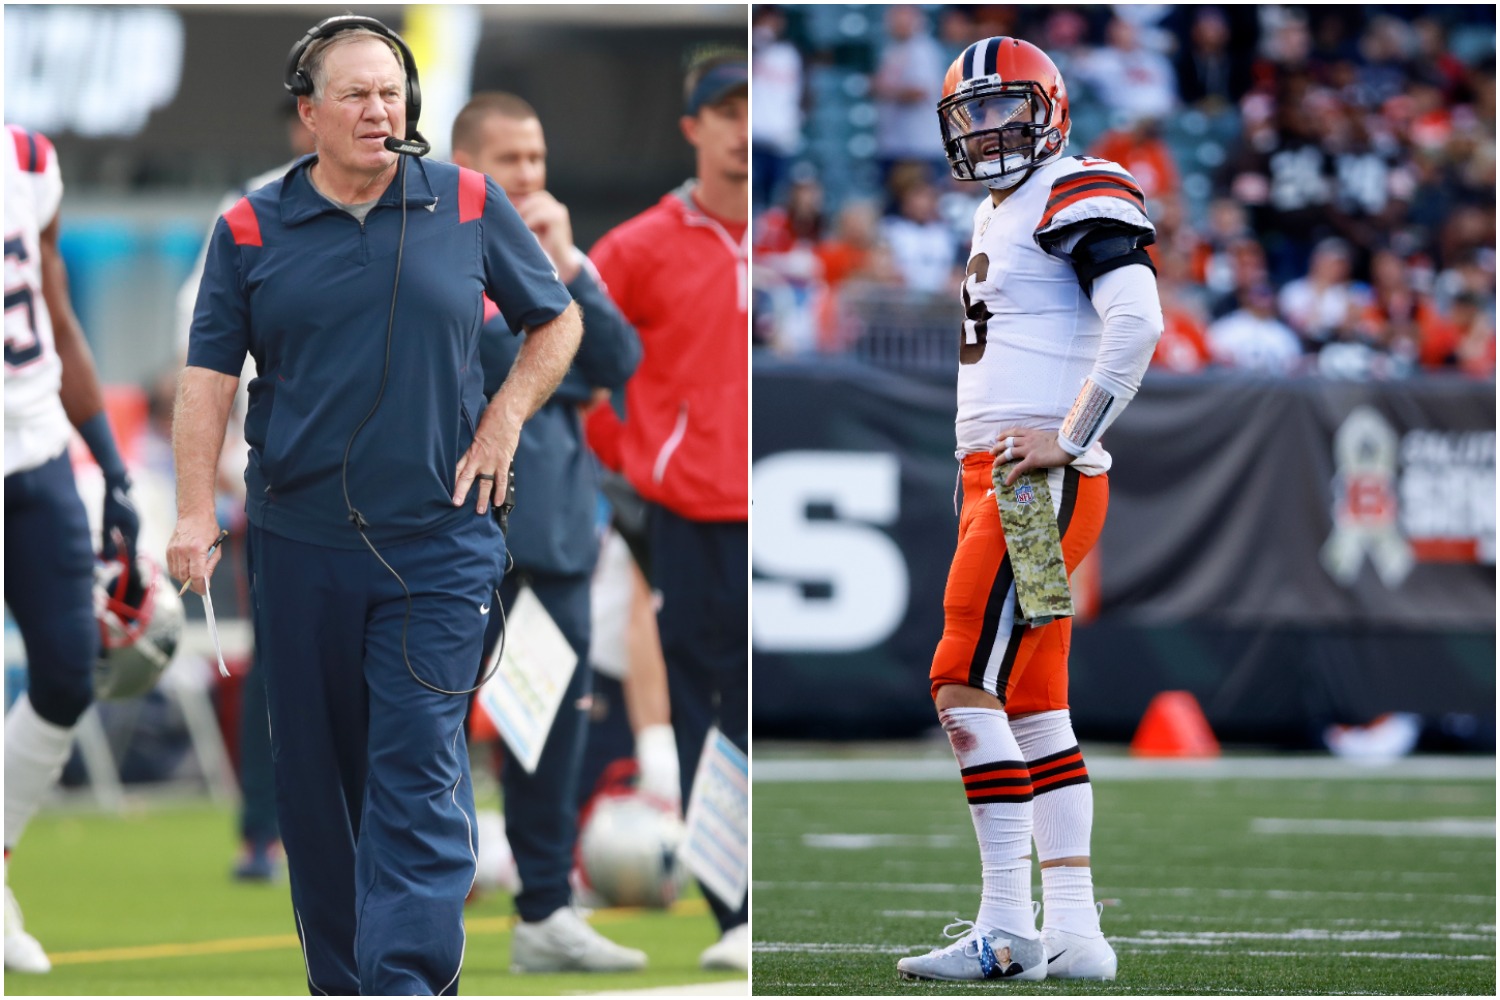 New England Patriots head coach Bill Belichick watches his team play while Cleveland Browns QB Baker Mayfield looks up during a game.